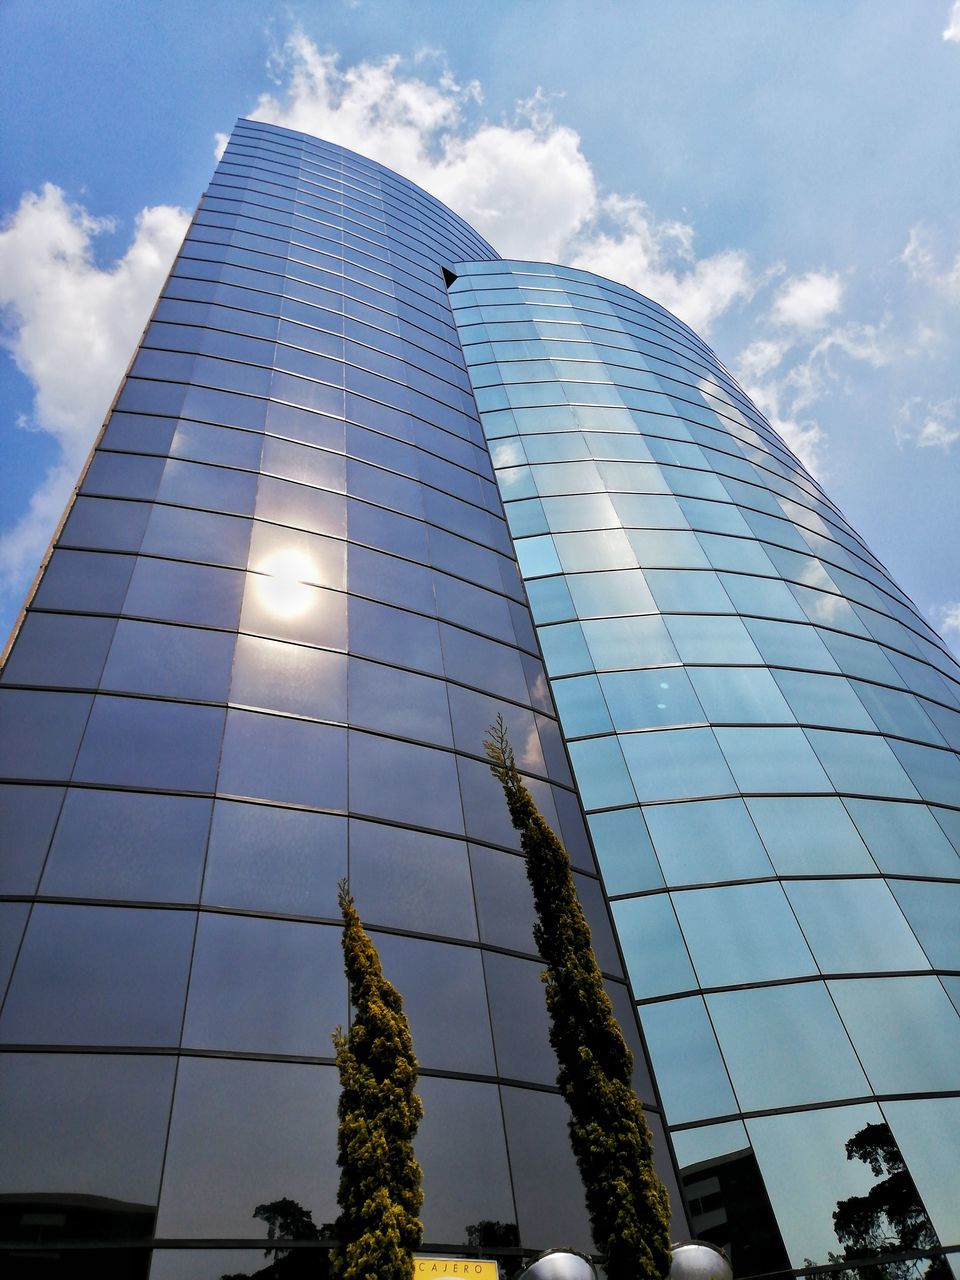 sky, low angle view, built structure, architecture, cloud - sky, building exterior, building, city, office building exterior, modern, office, nature, glass - material, no people, reflection, sunlight, day, tall - high, tower, outdoors, skyscraper, glass